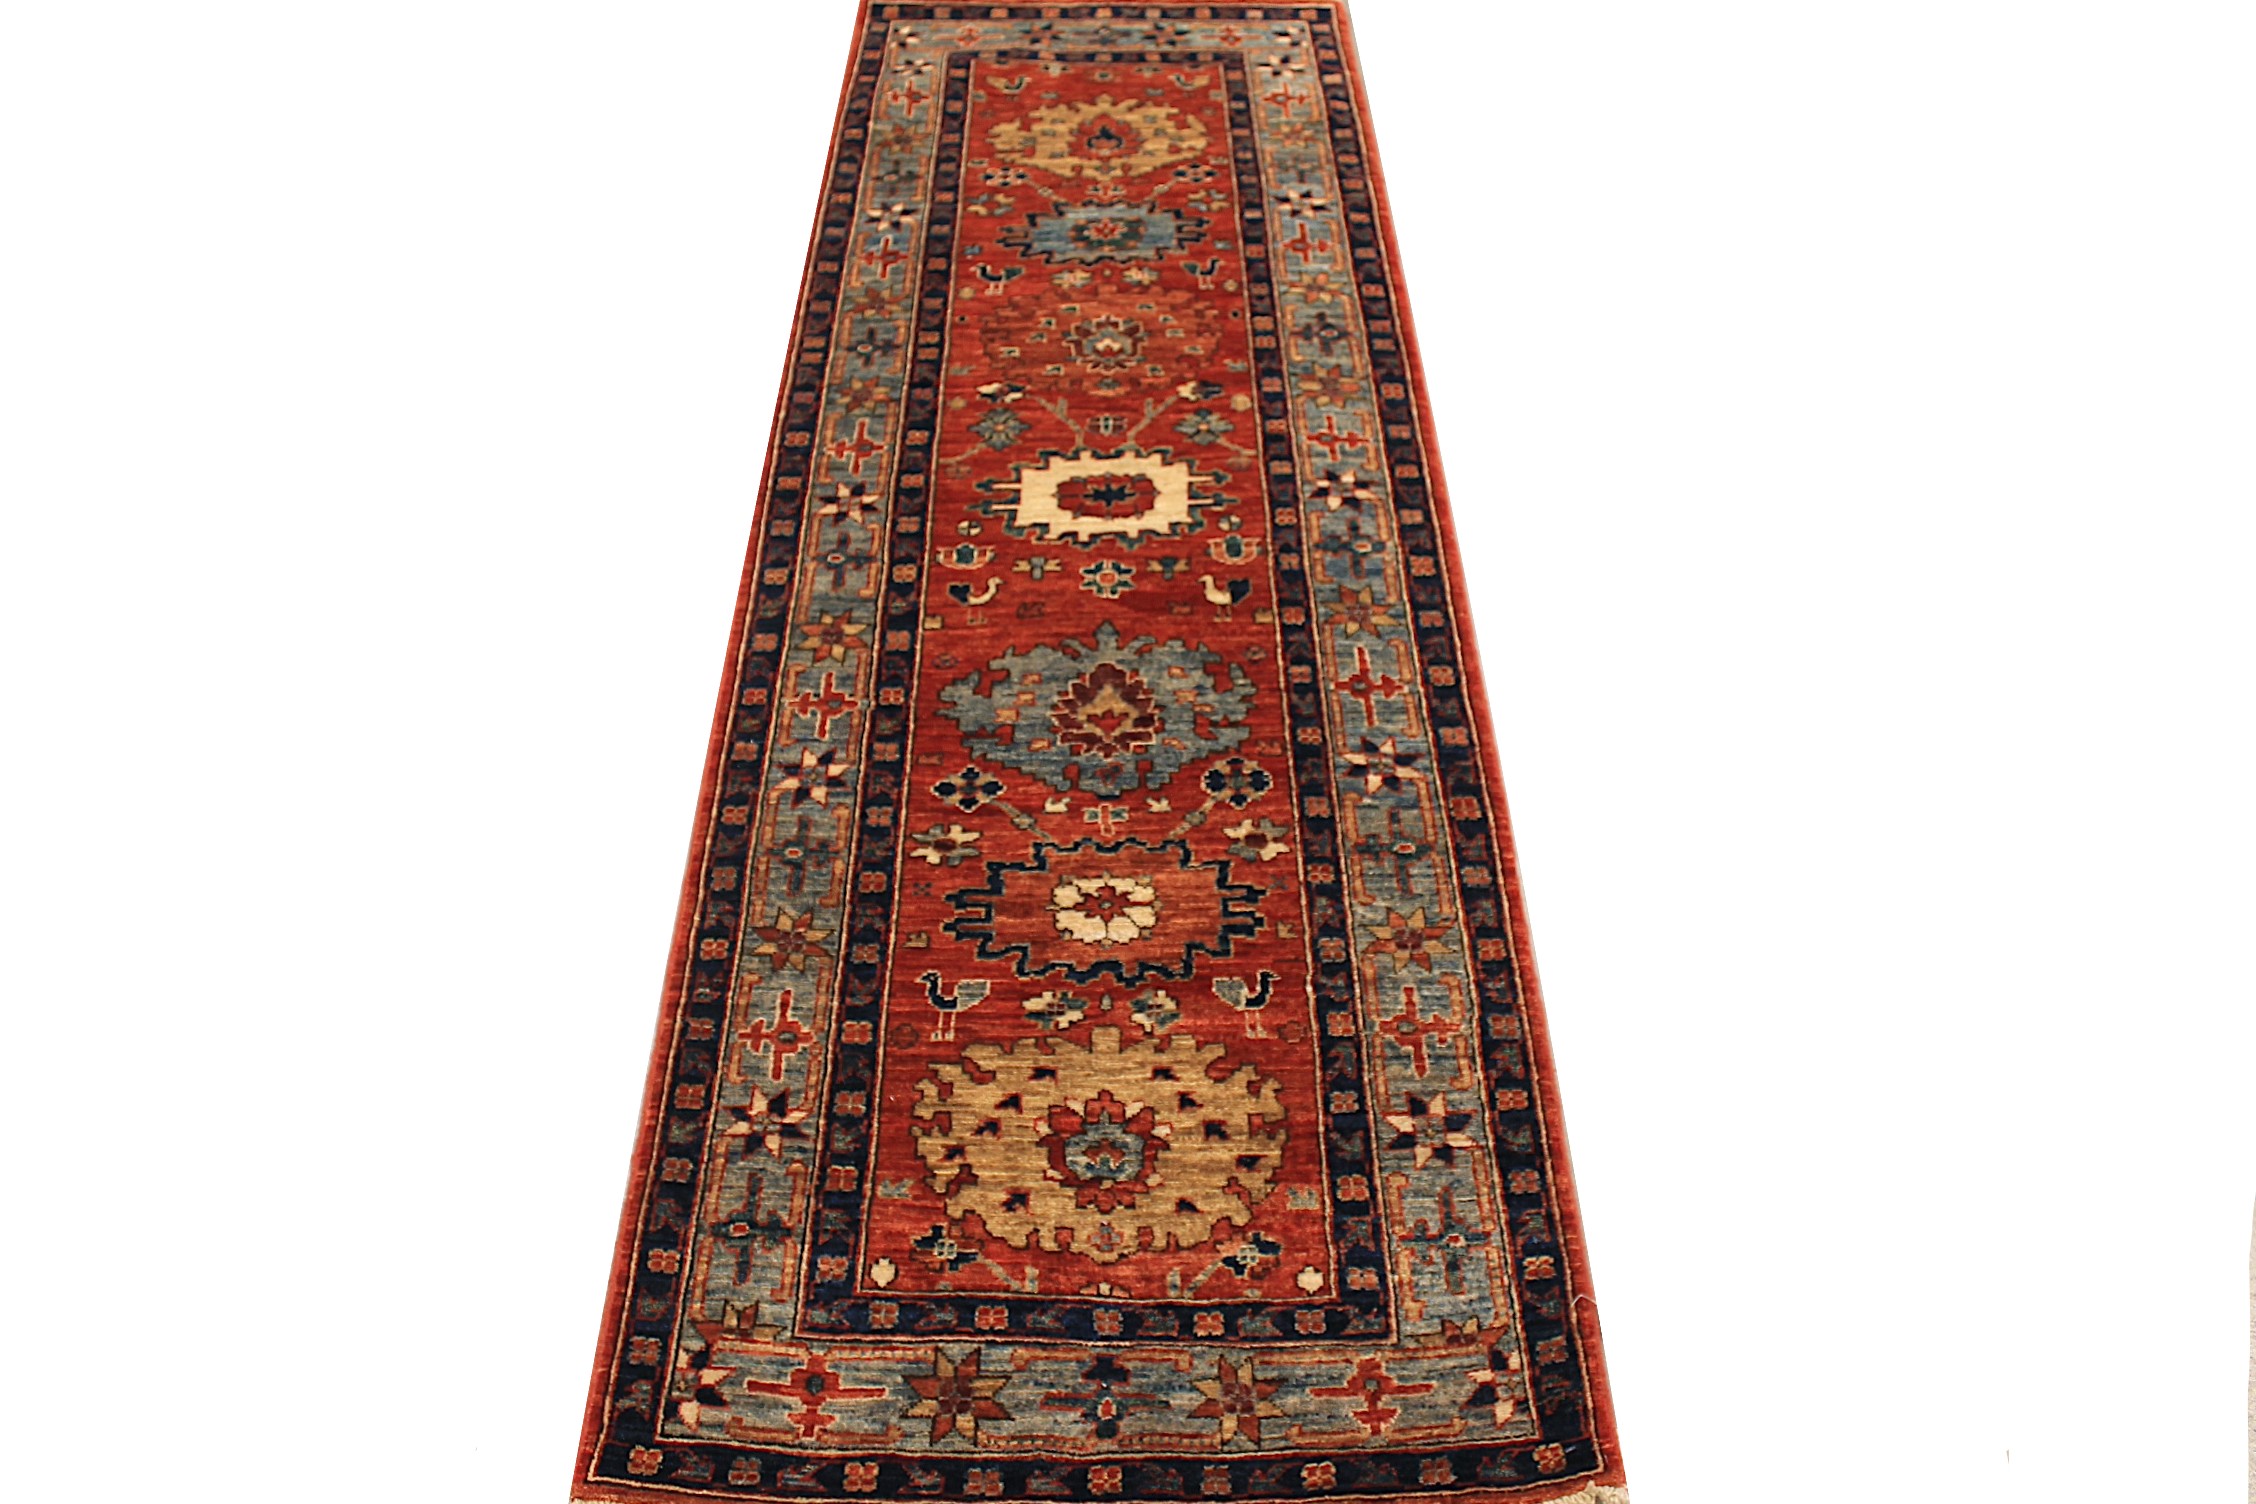 8 ft. Runner Aryana & Antique Revivals Hand Knotted Wool Area Rug - MR027836